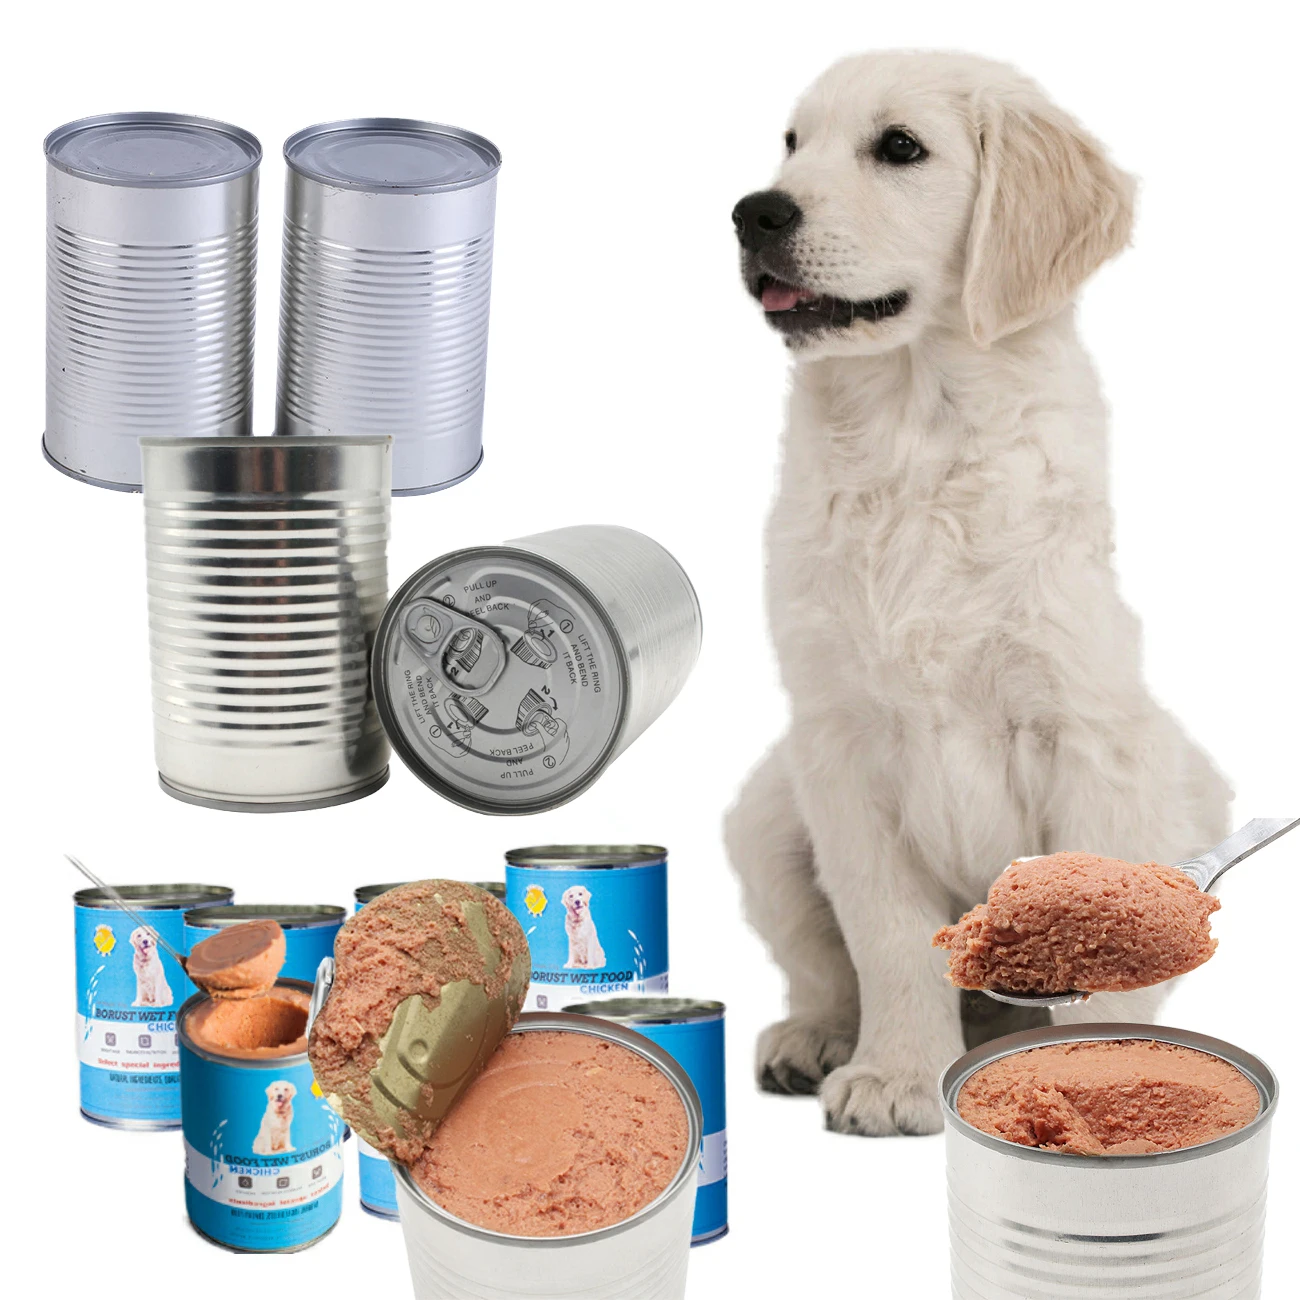 Cheap Modern Dog Food Exporters High Nutrition Reliable Quality Dog Food  For Puppies - Buy Dog Food For Puppies,Dog Food Price,Dog Food Exporters  Product on 